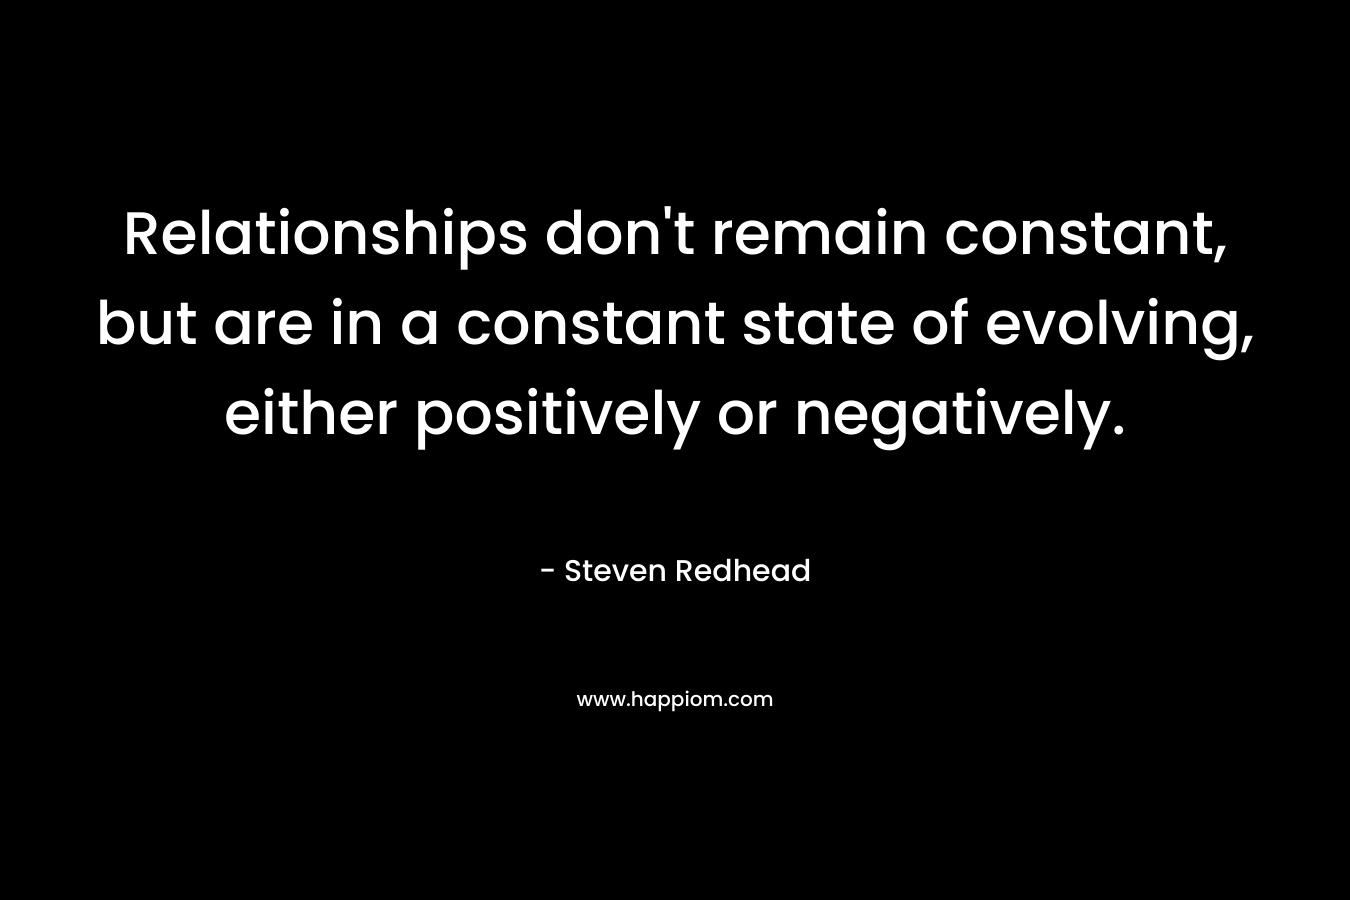 Relationships don't remain constant, but are in a constant state of evolving, either positively or negatively.